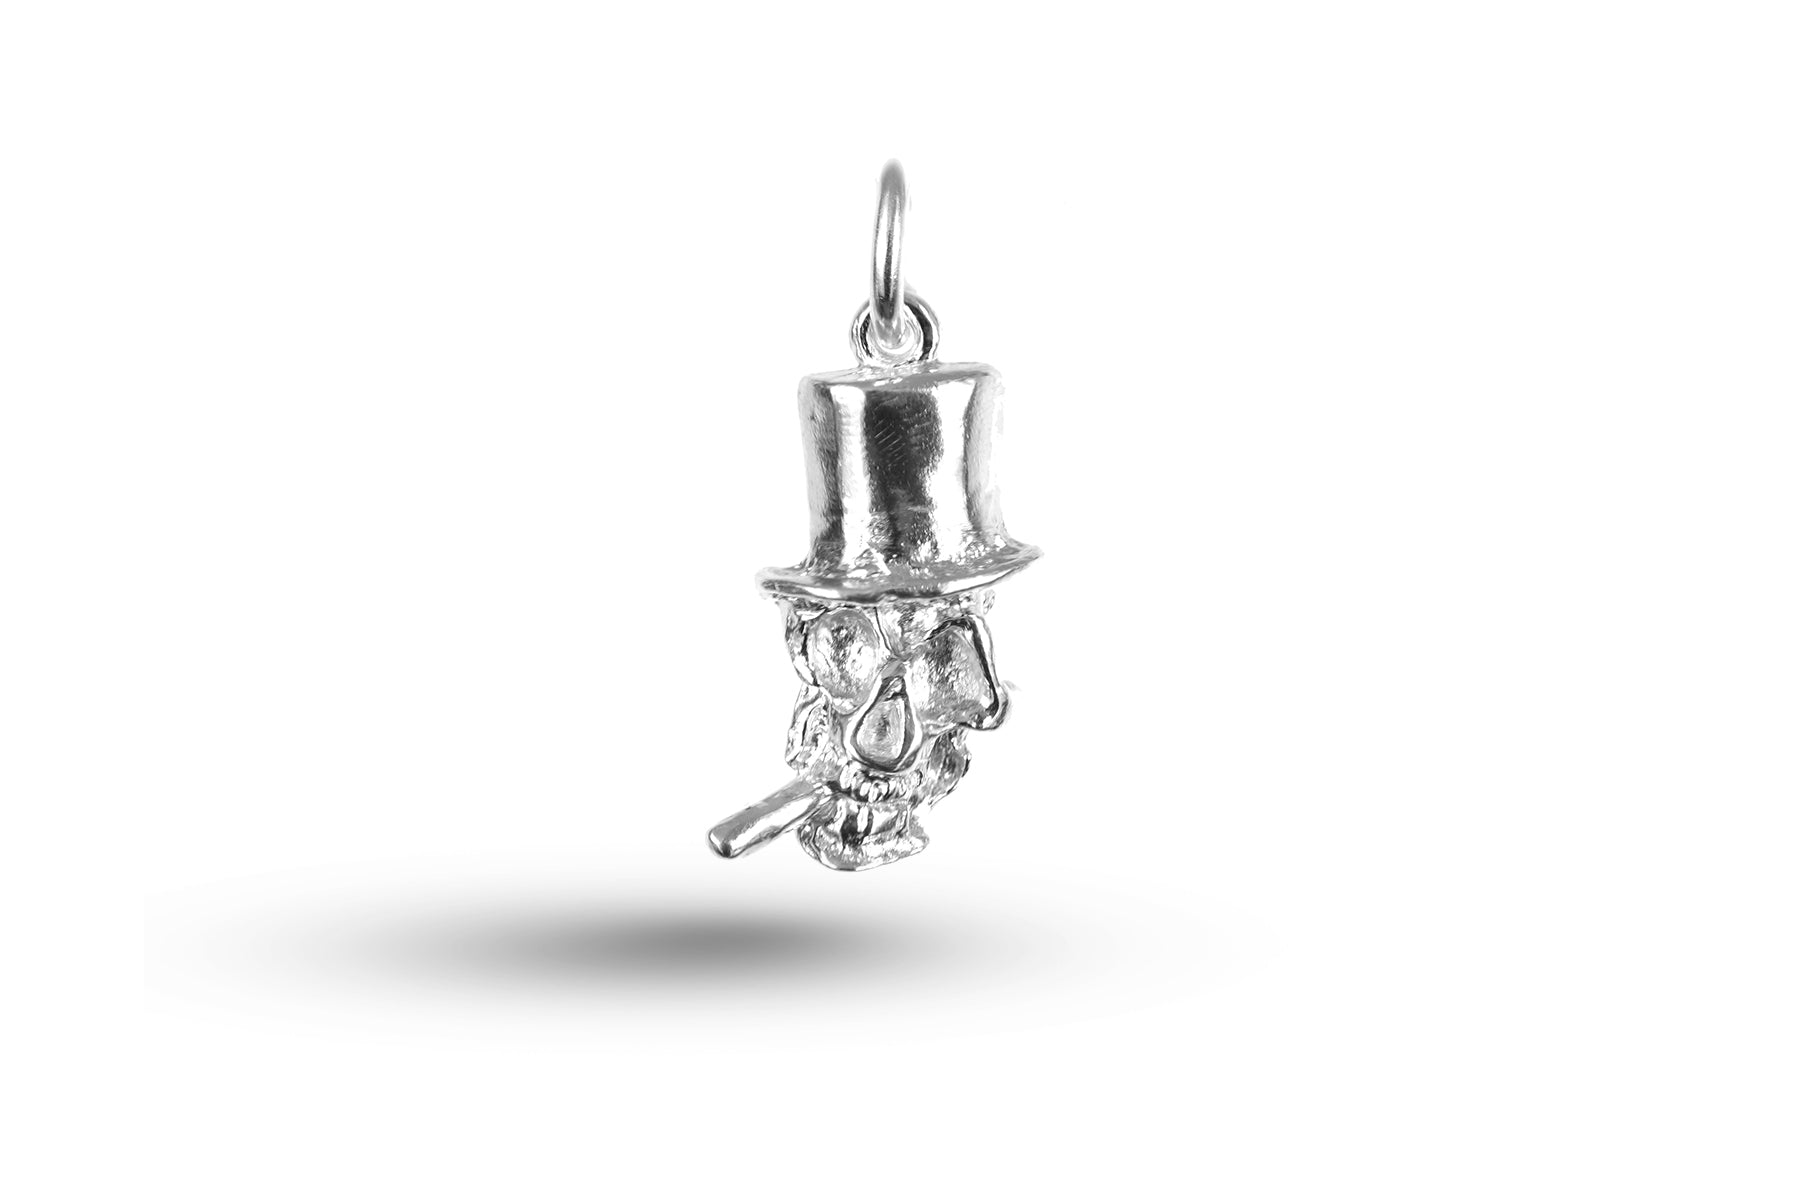 White gold Skull with Top Hat charm.